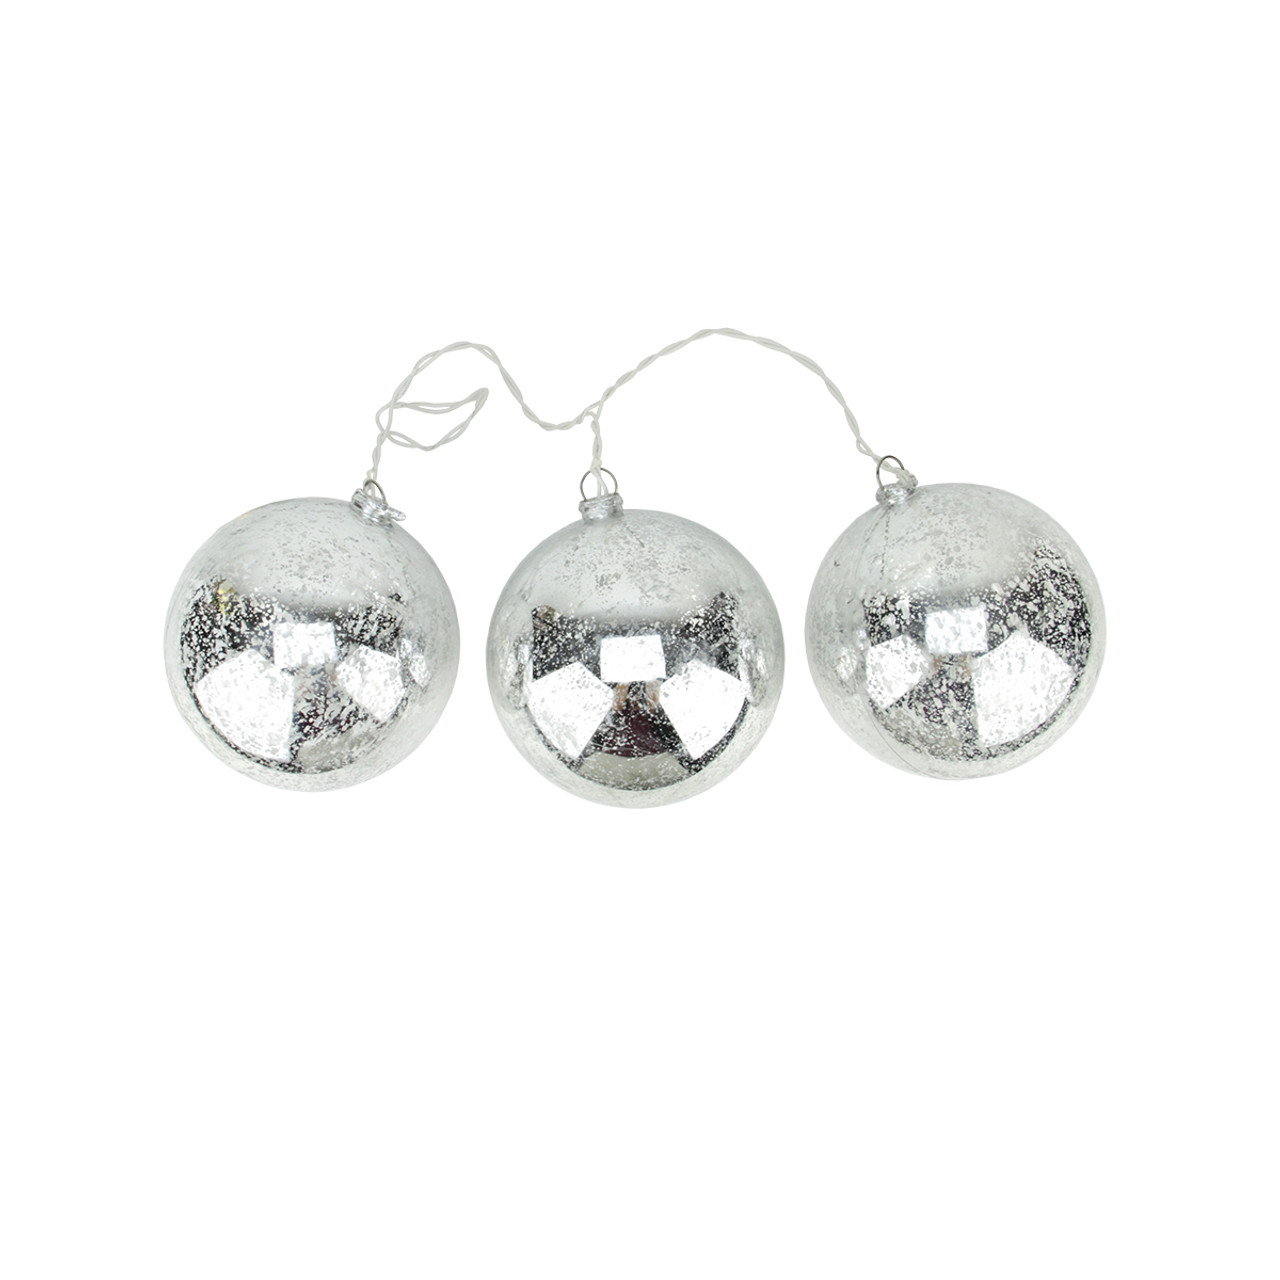 Set of 3 Lighted Silver Mercury Glass Finish Ball Christmas Ornaments ...